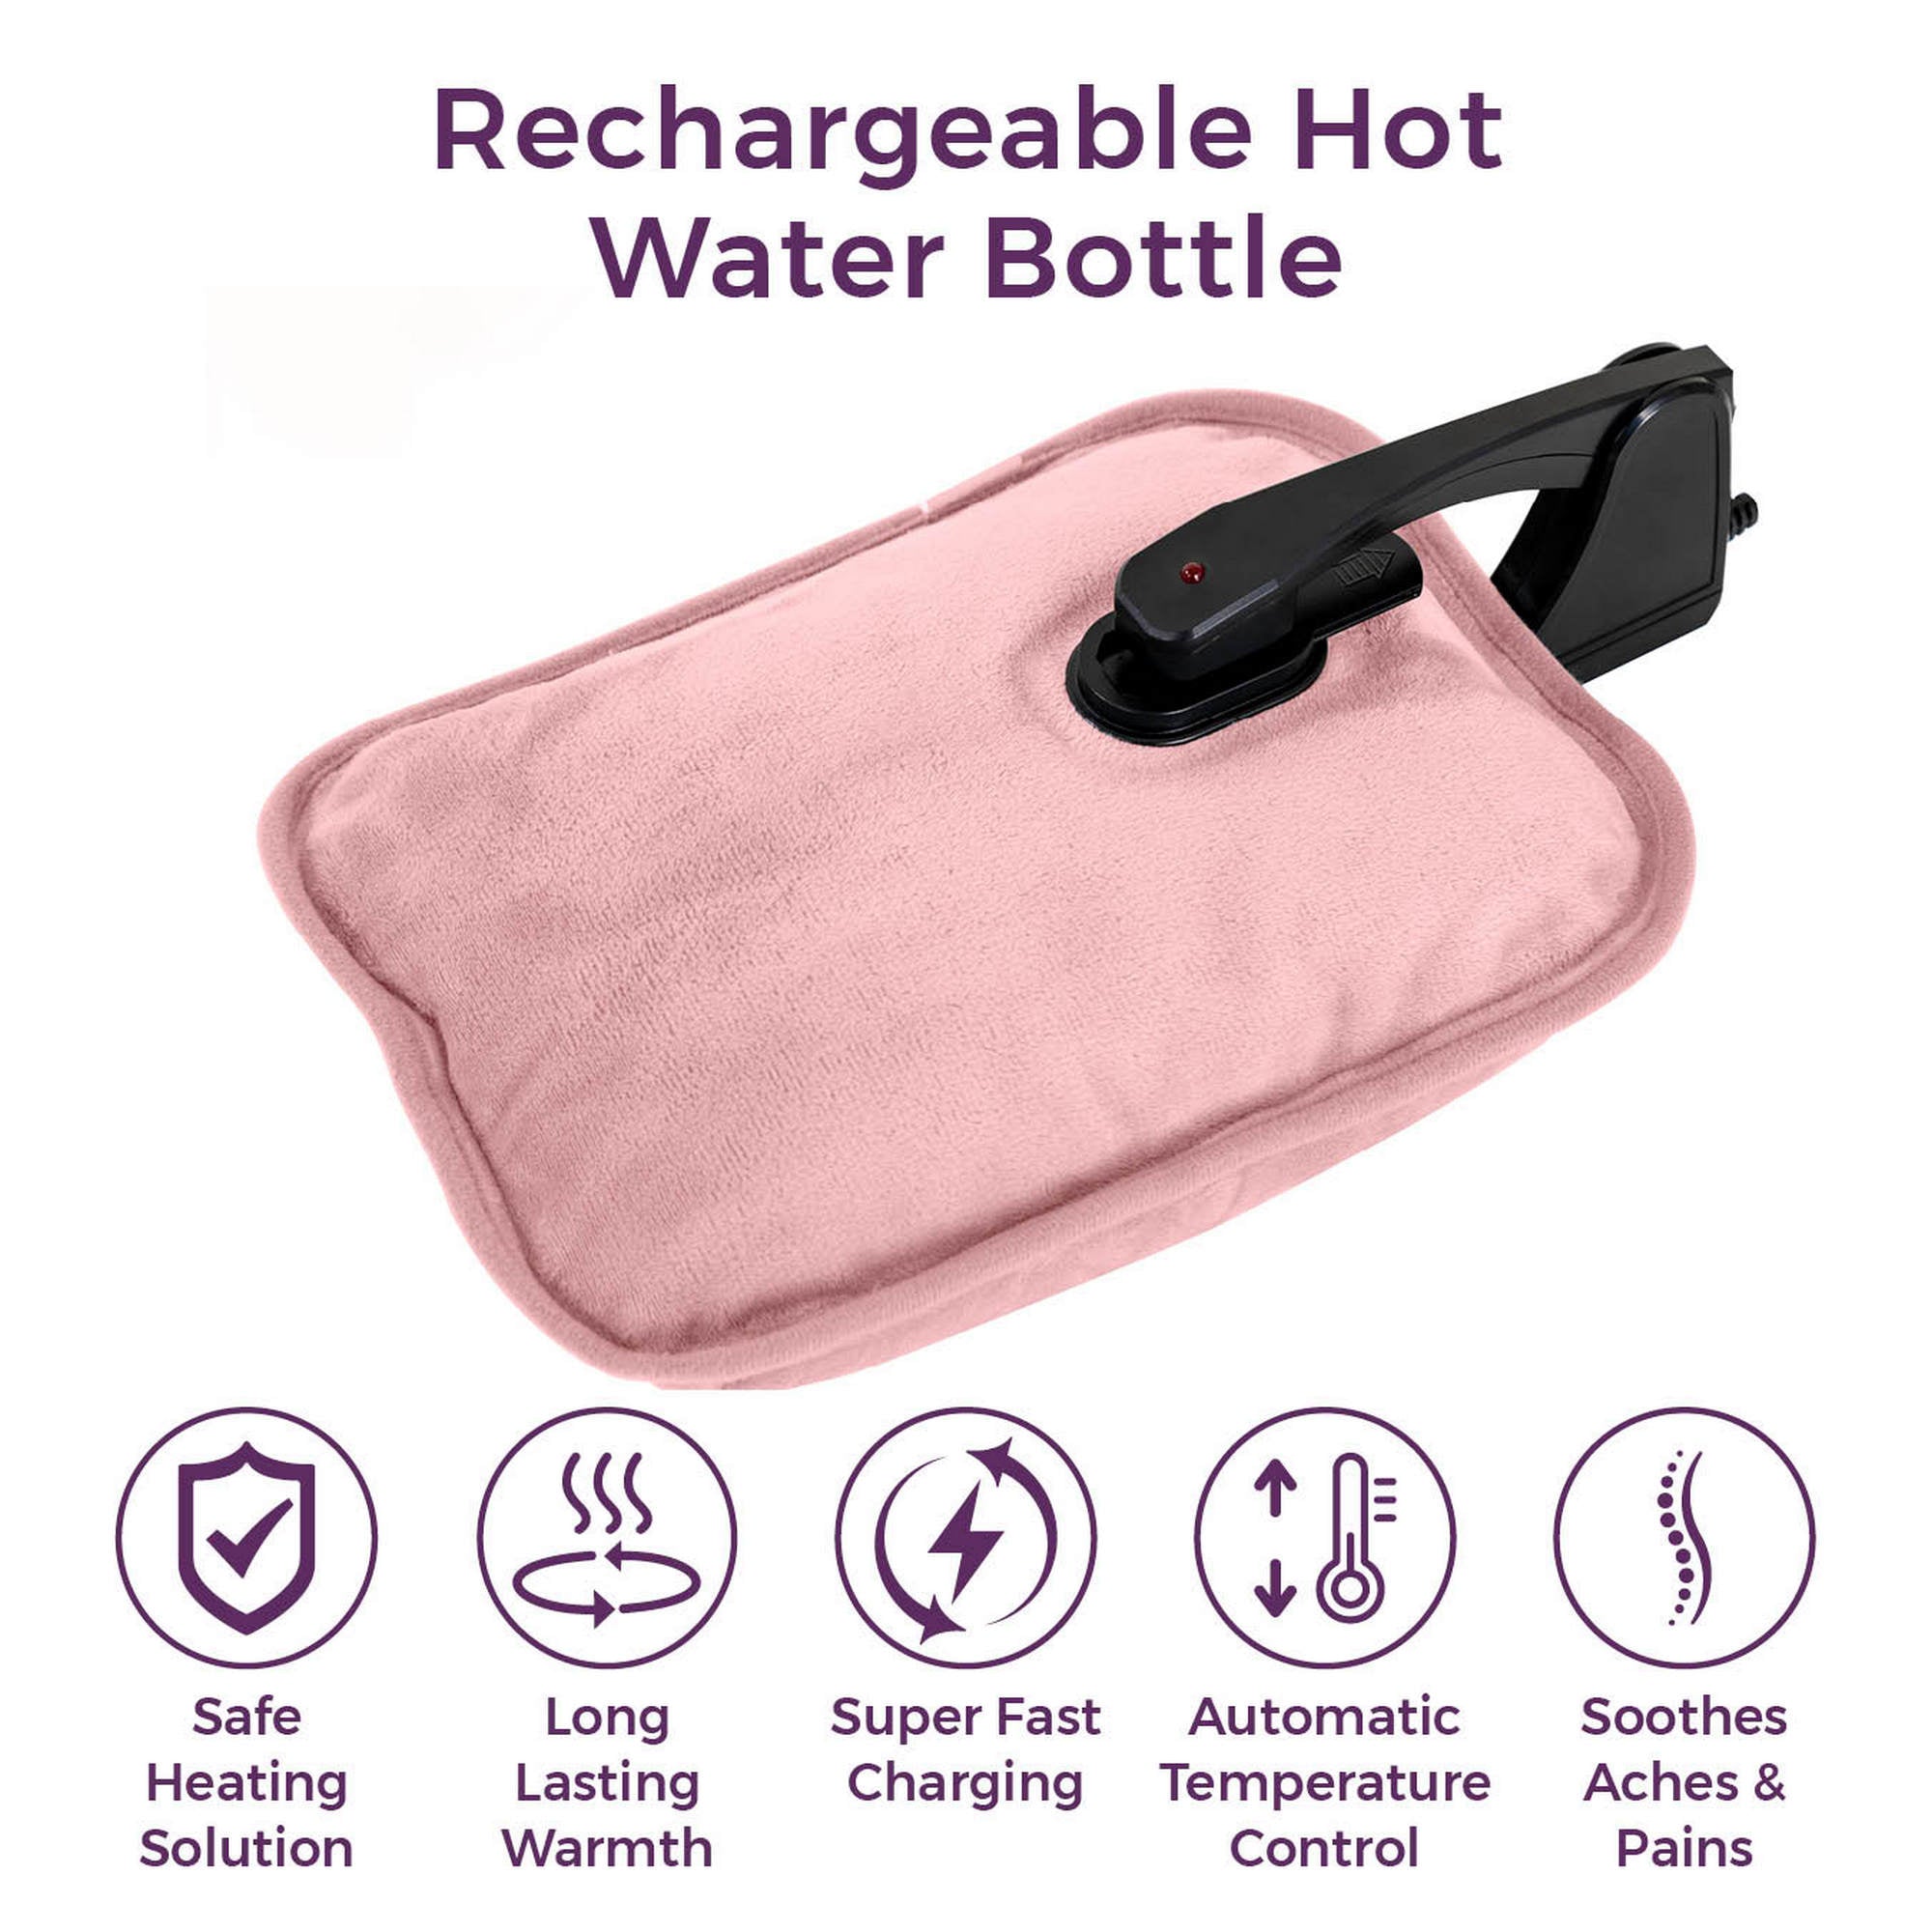 Carmen Rechargeable Hot Water Bottle Pink Features